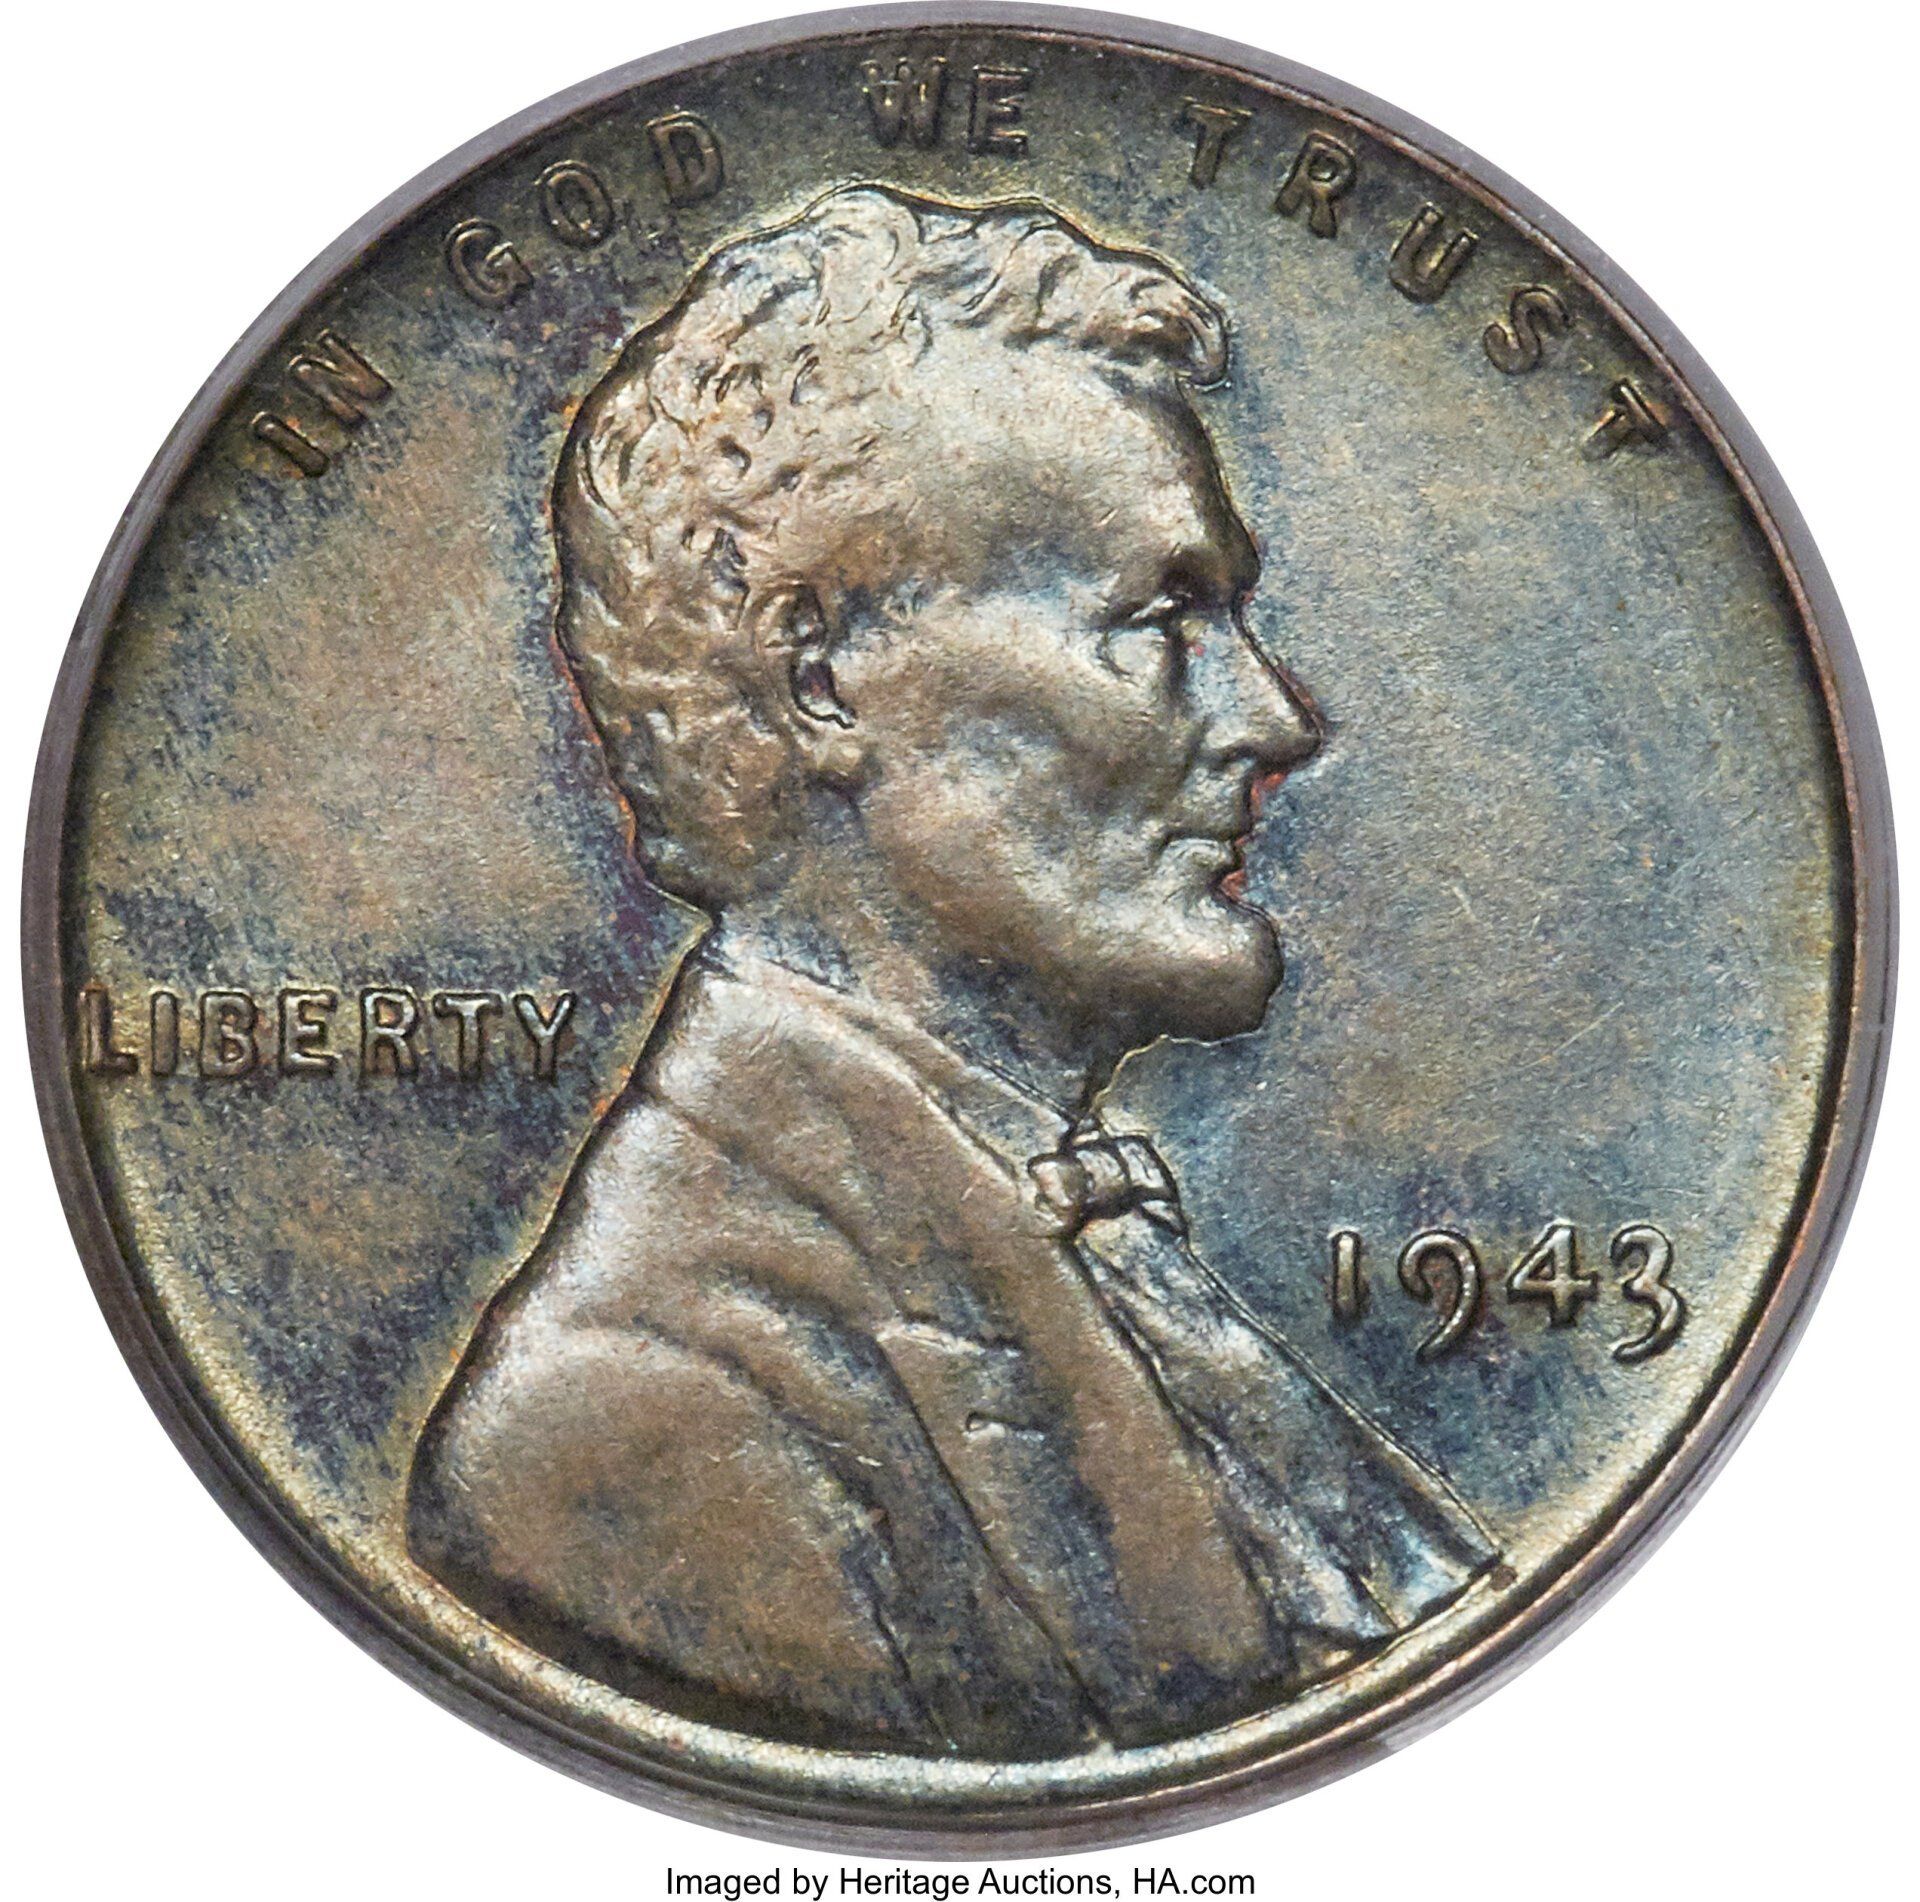 1943 bronze lincoln wheat cent. imaged by Heritage Auctions, HA.com